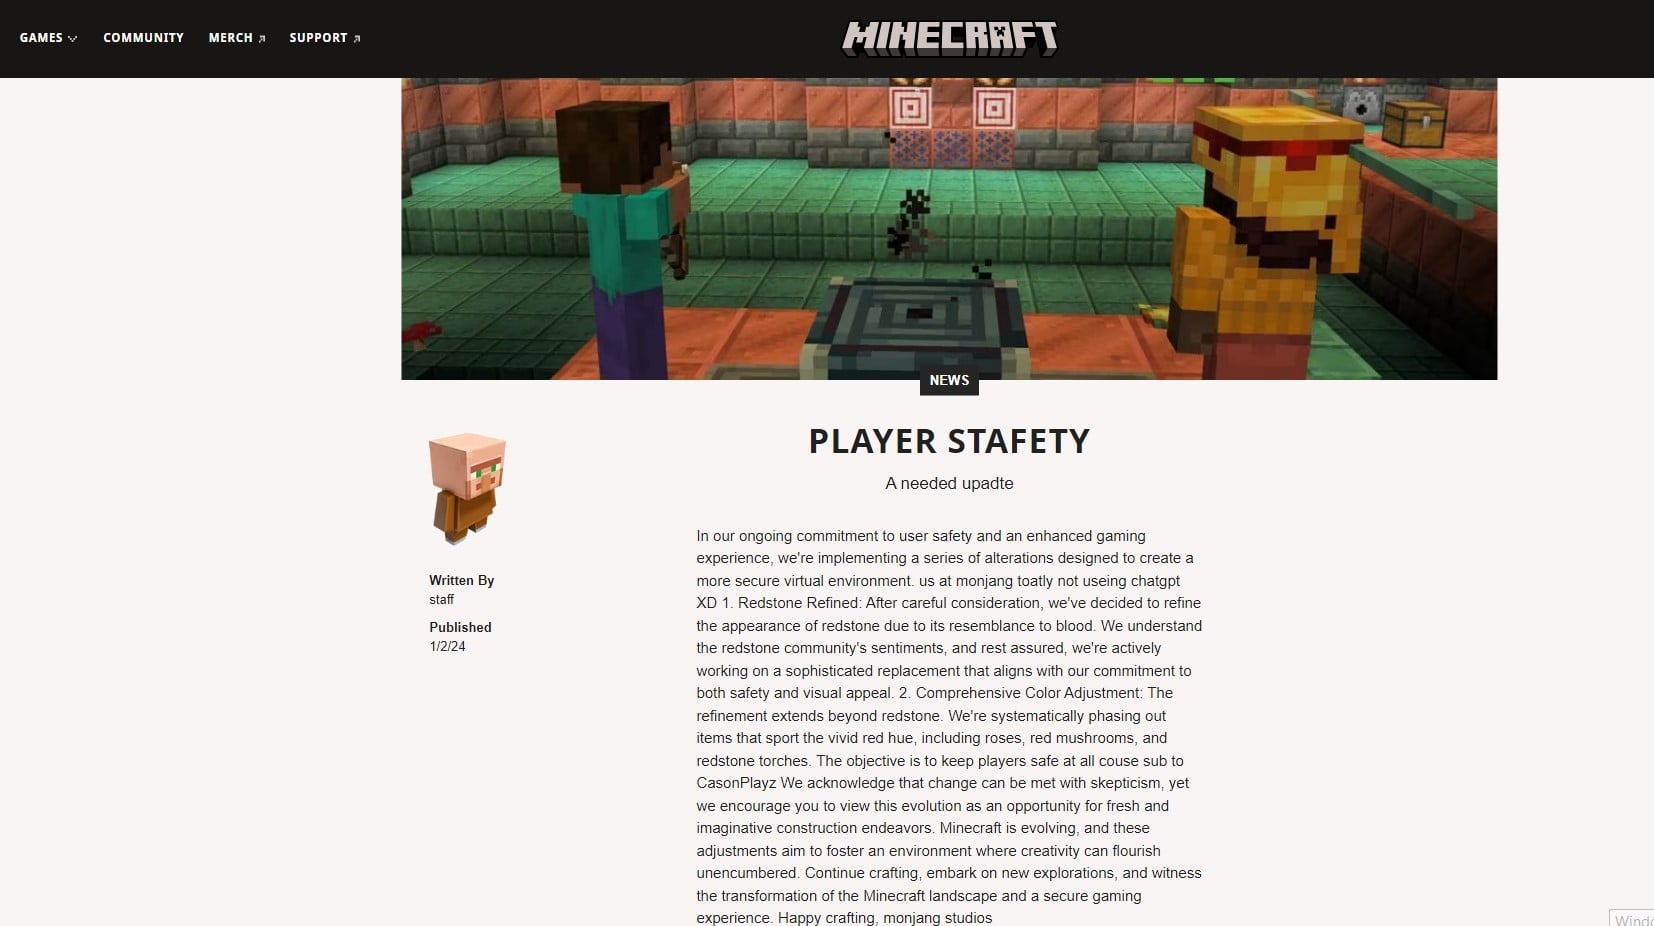 Minecraft Memes - "Mojang's spicy removal rampage"